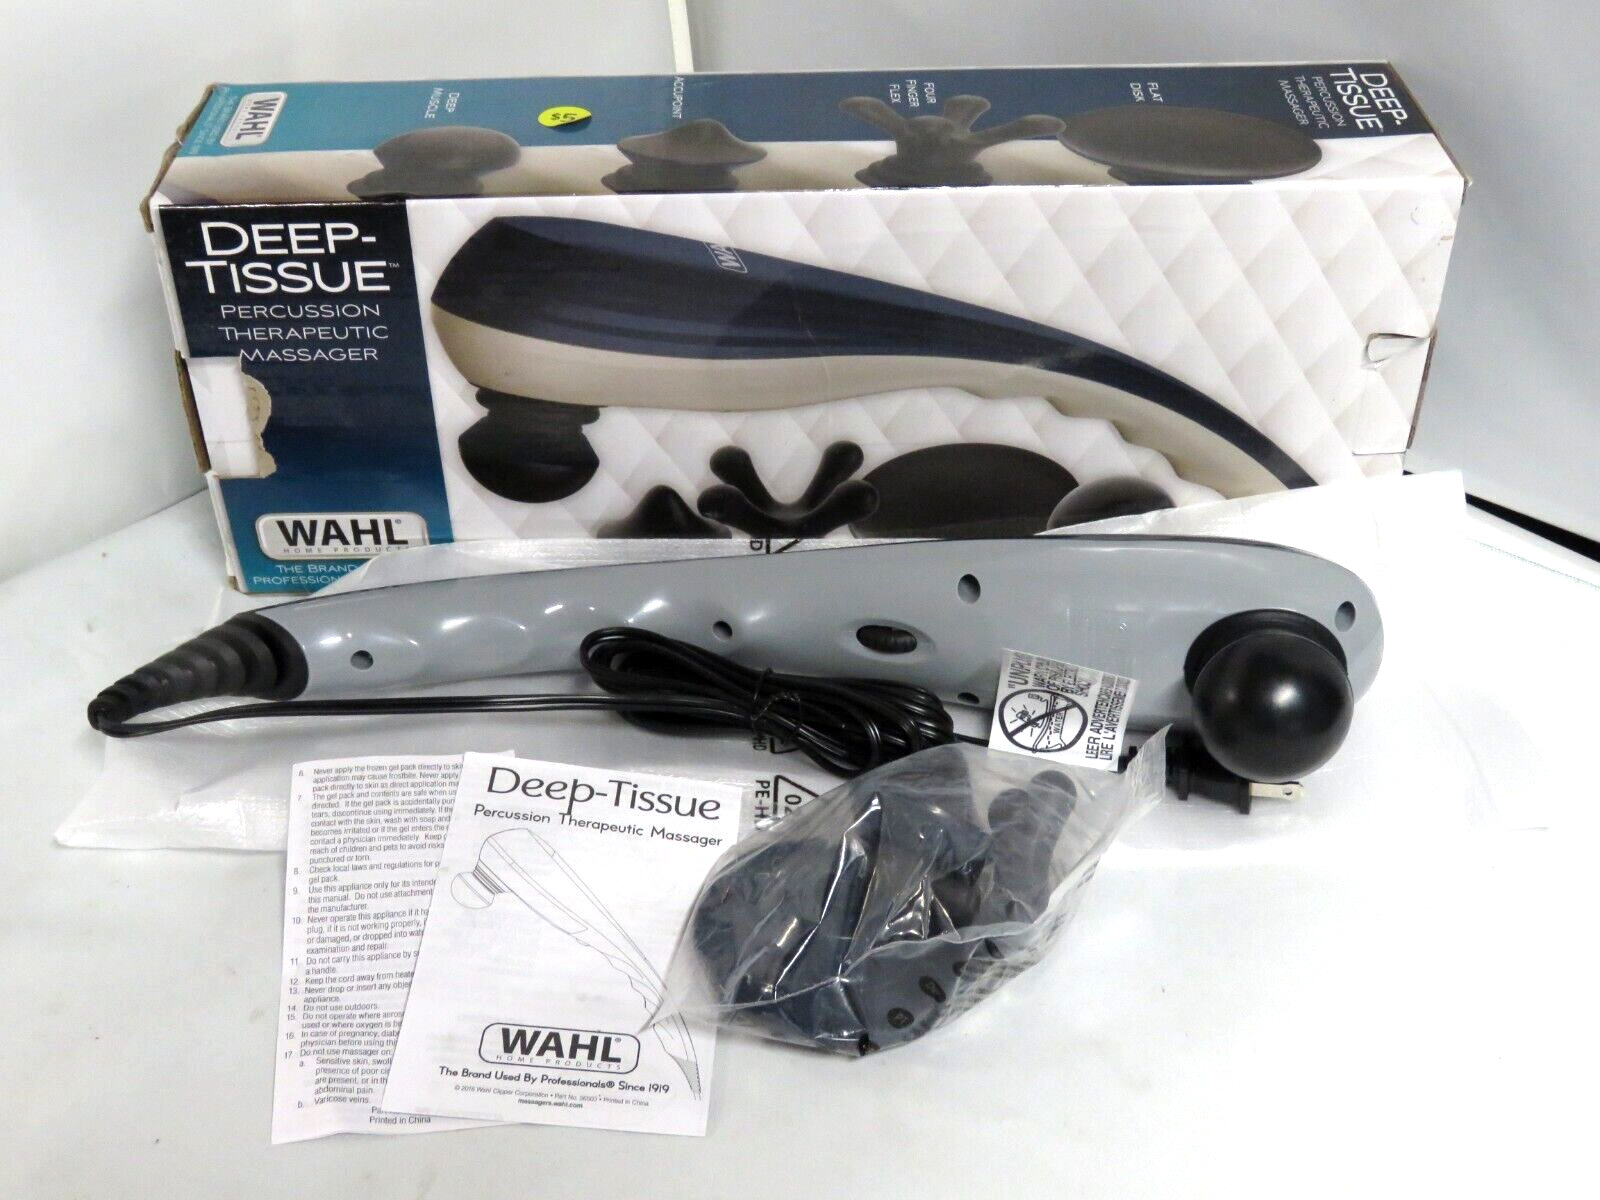 Wahl Deep-Tissue Percussion Therapeutic Massager Damaged Box